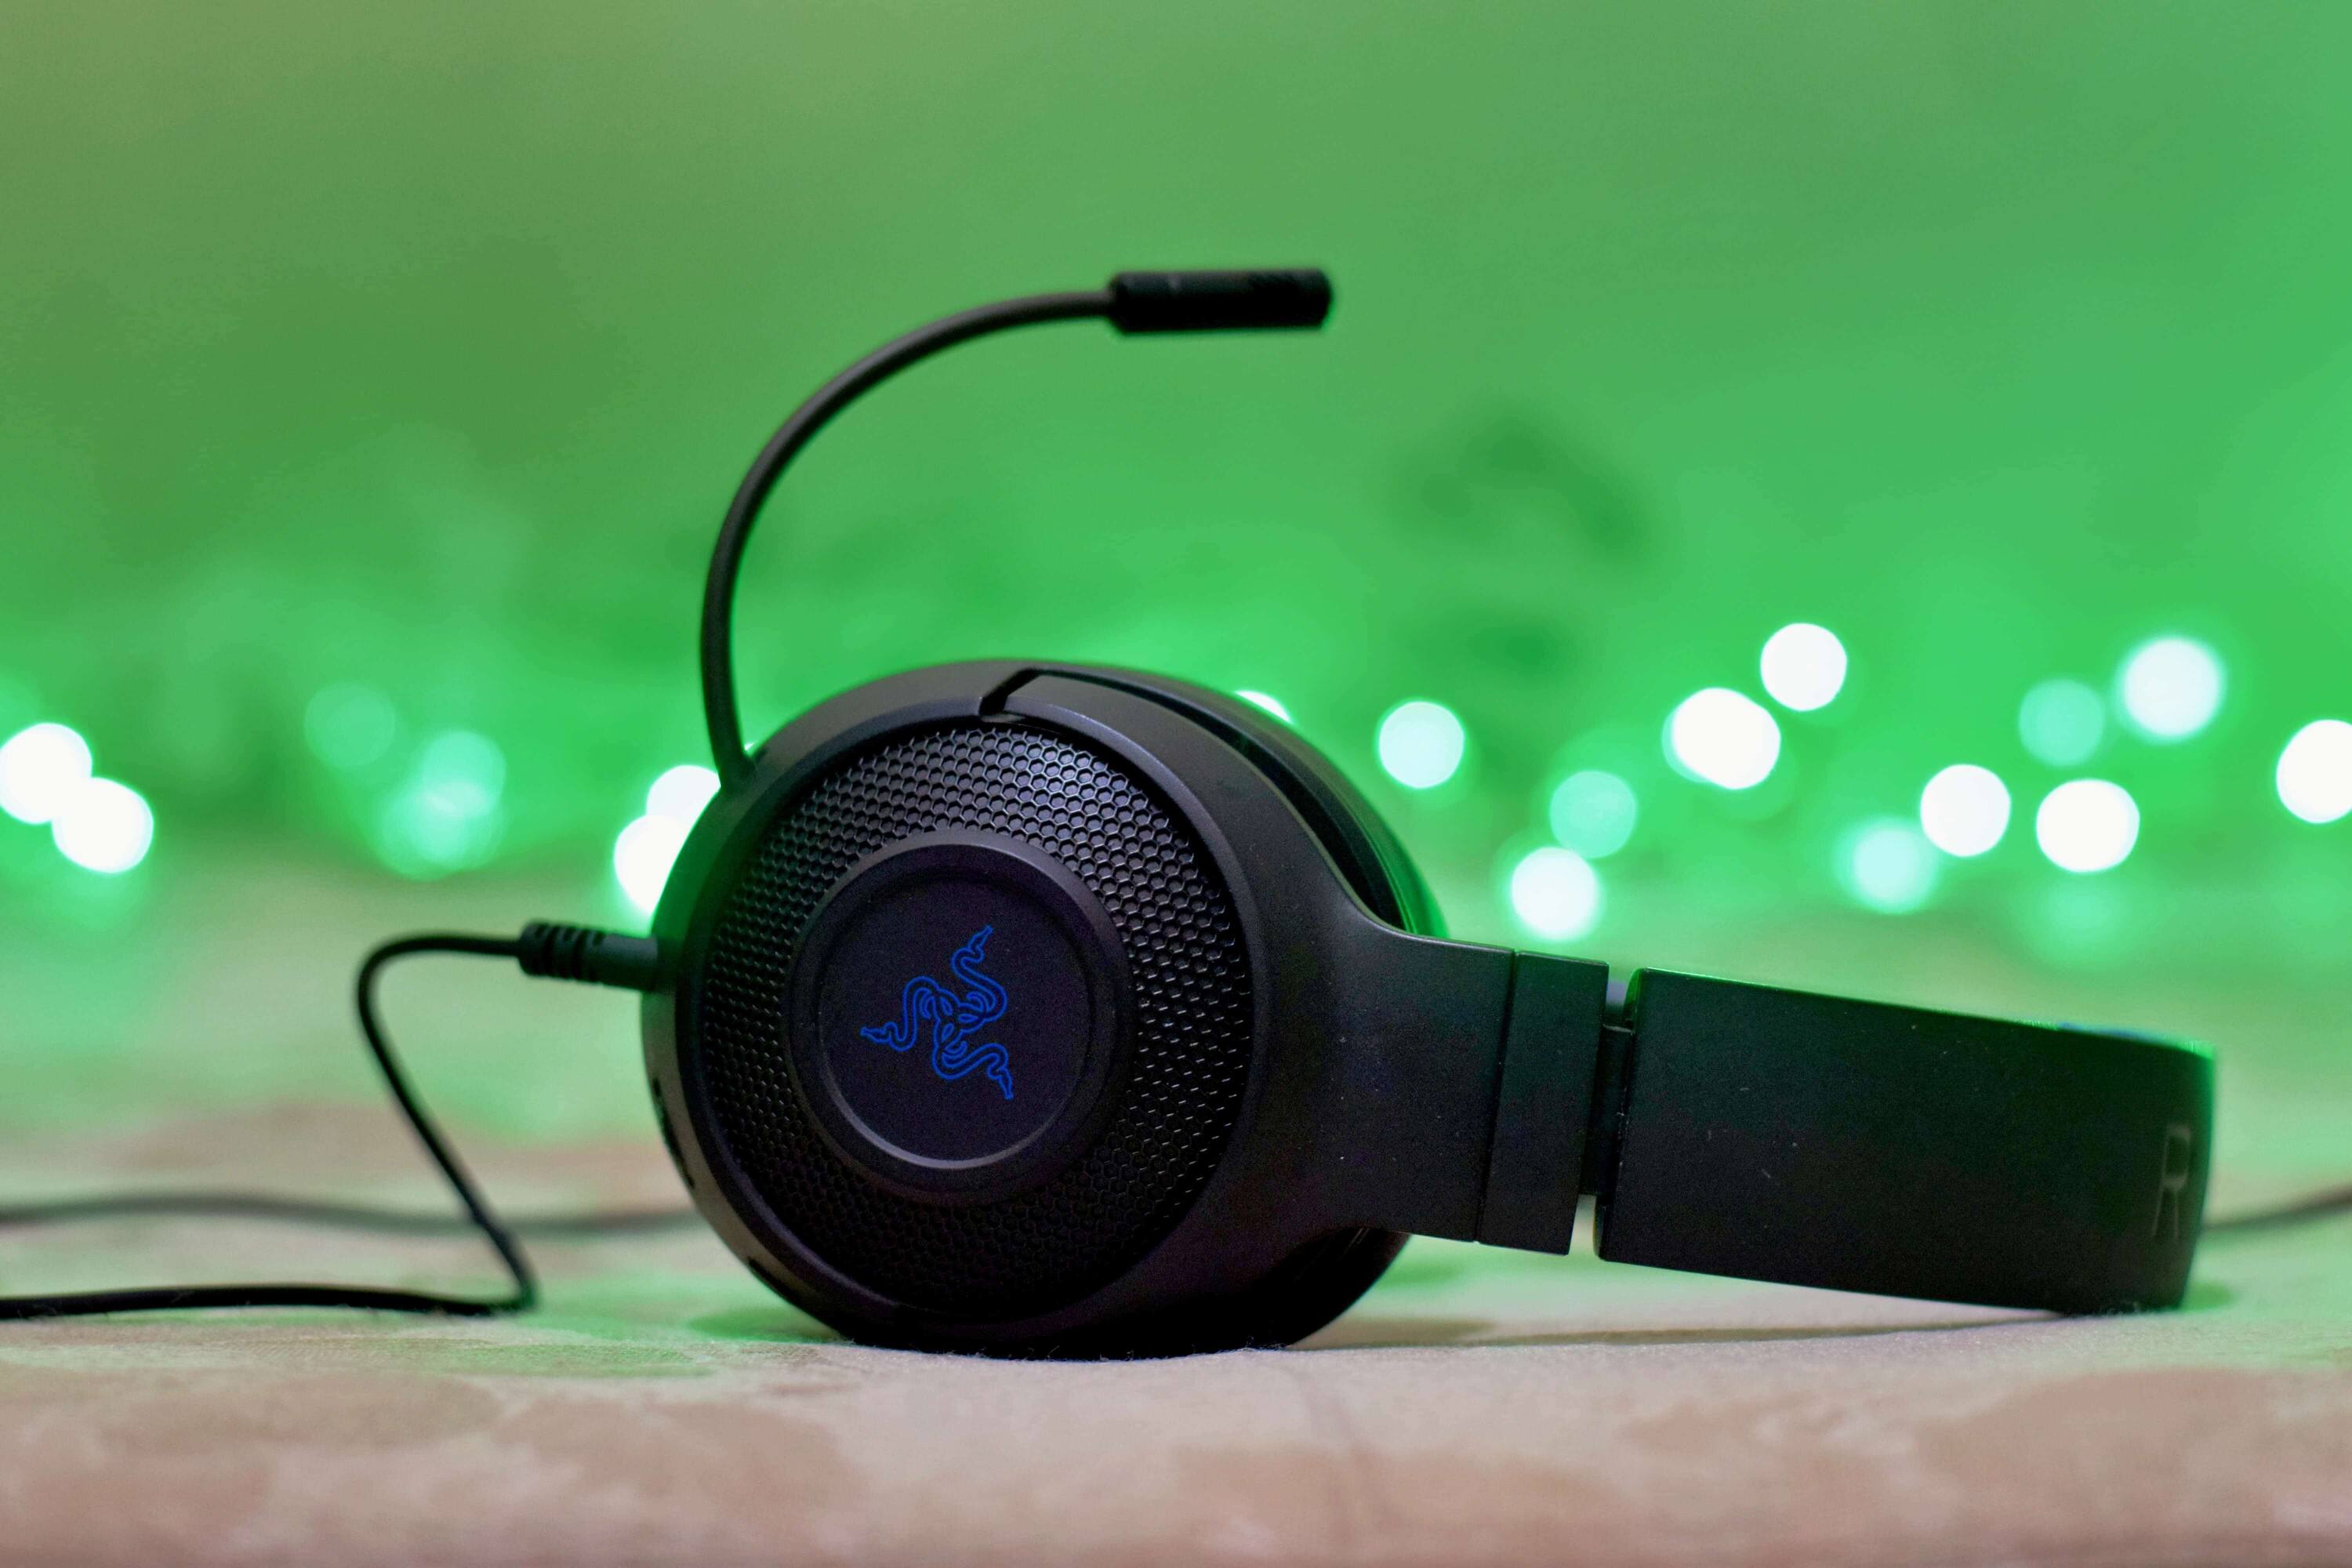 How To Use Noise Cancelling On Gaming Headset